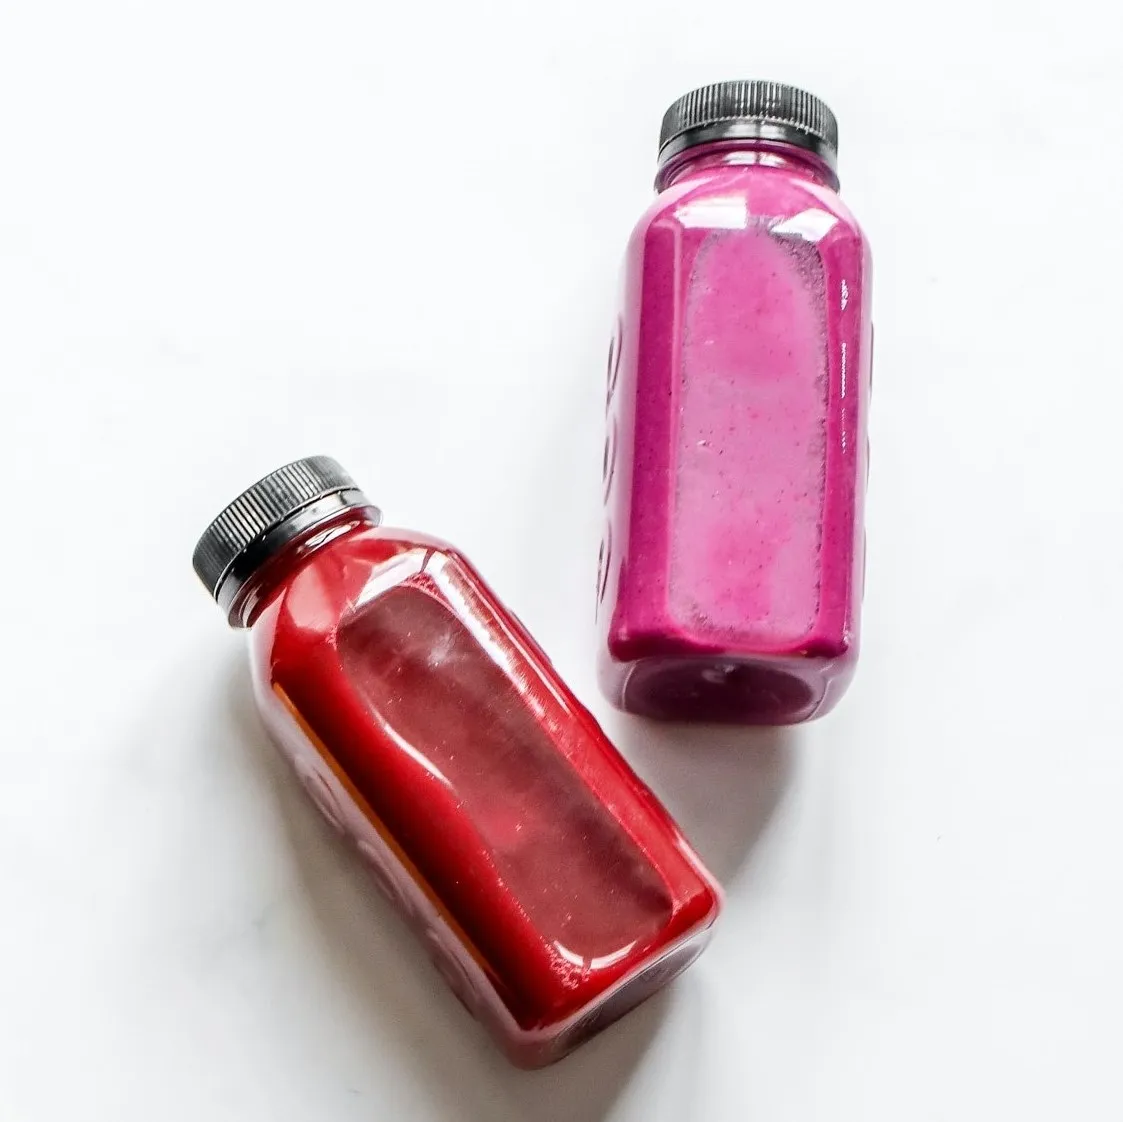 Two unlabeled bottles with pink content lying on a white surface